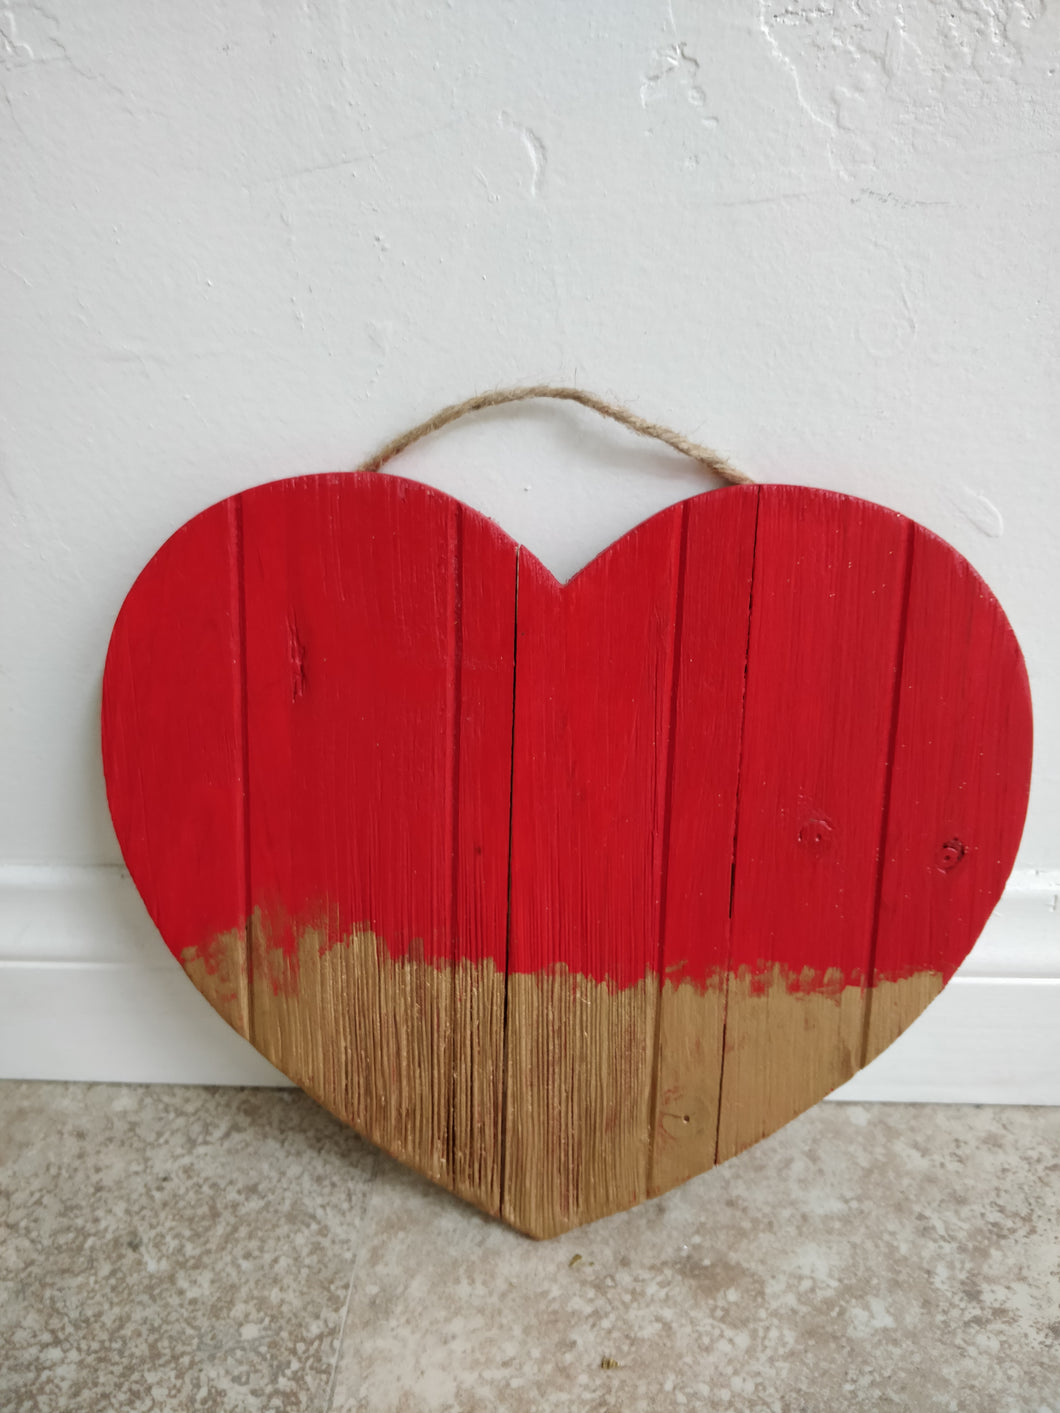 Hand-Painted Wooden Heart Wall Decor – Gordelly, Unlimited